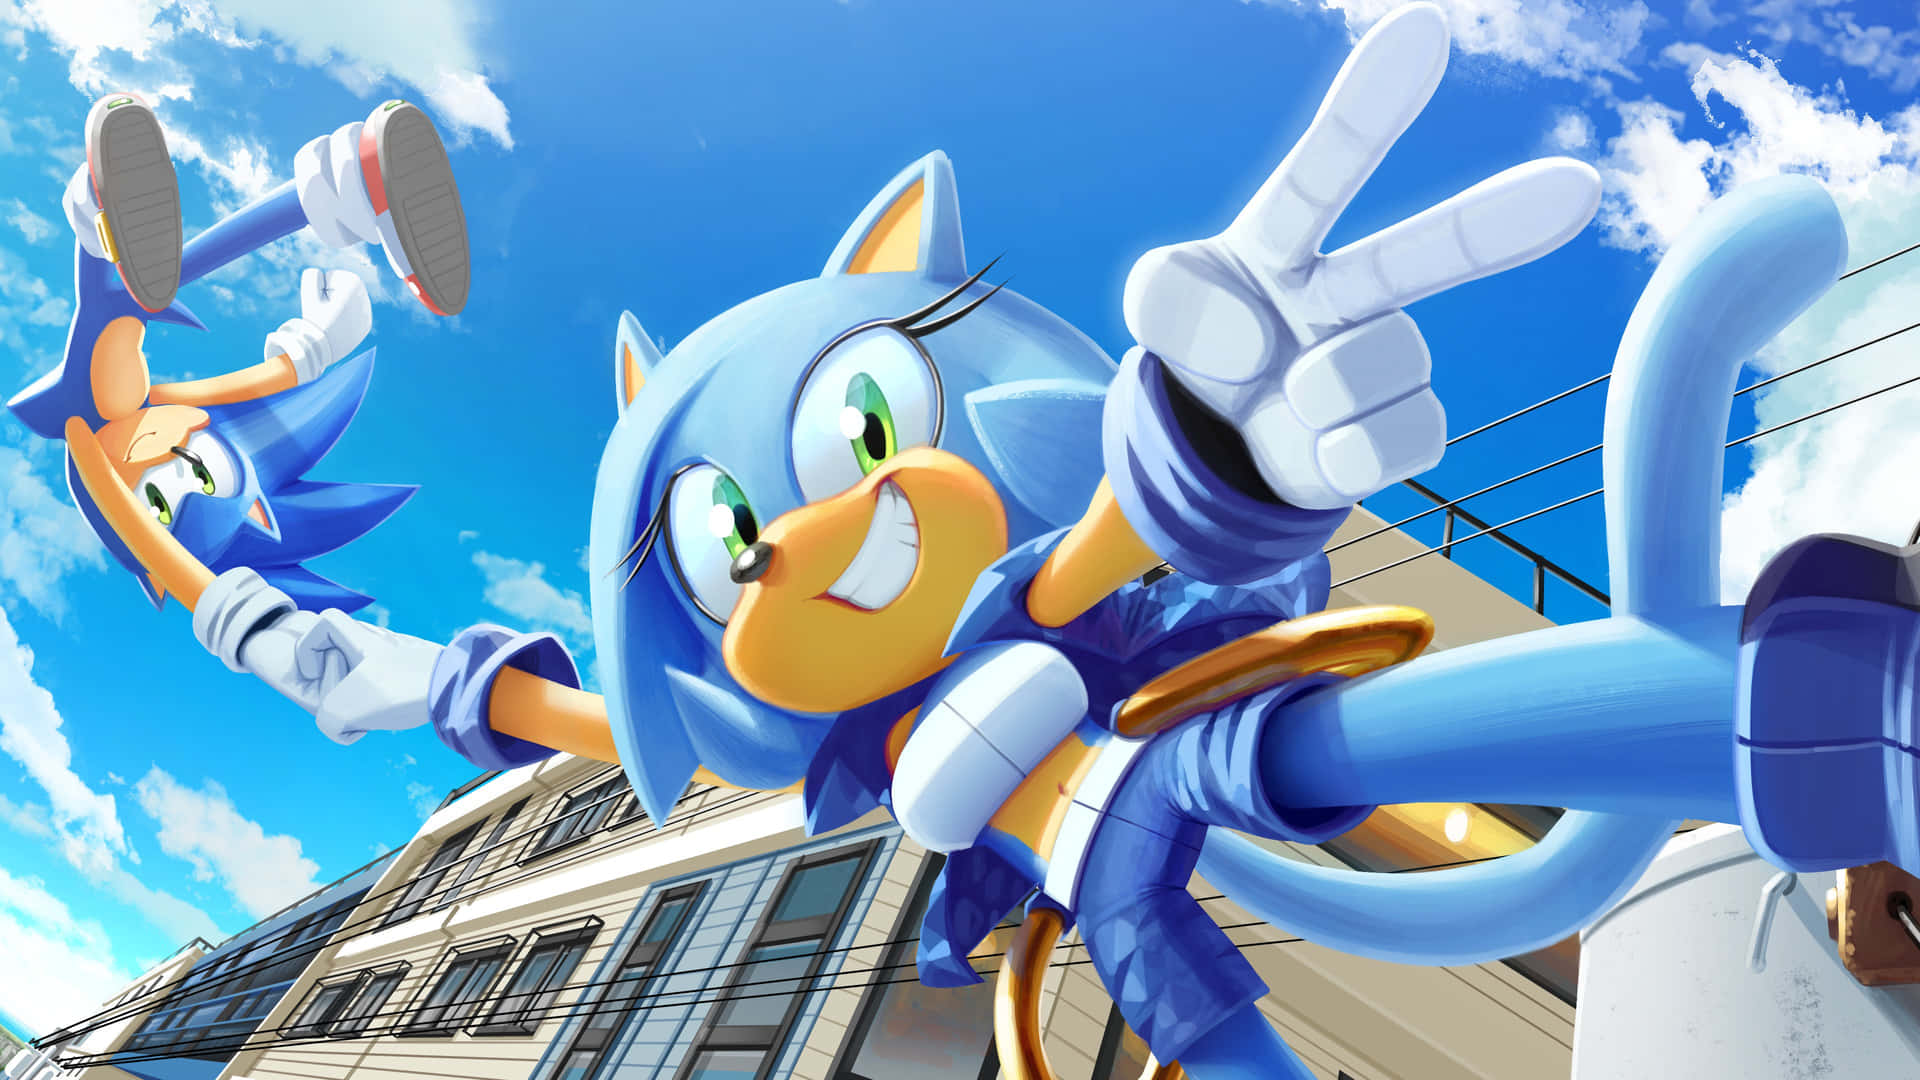 Your Favorite Sonic Characters in High Definition Wallpaper